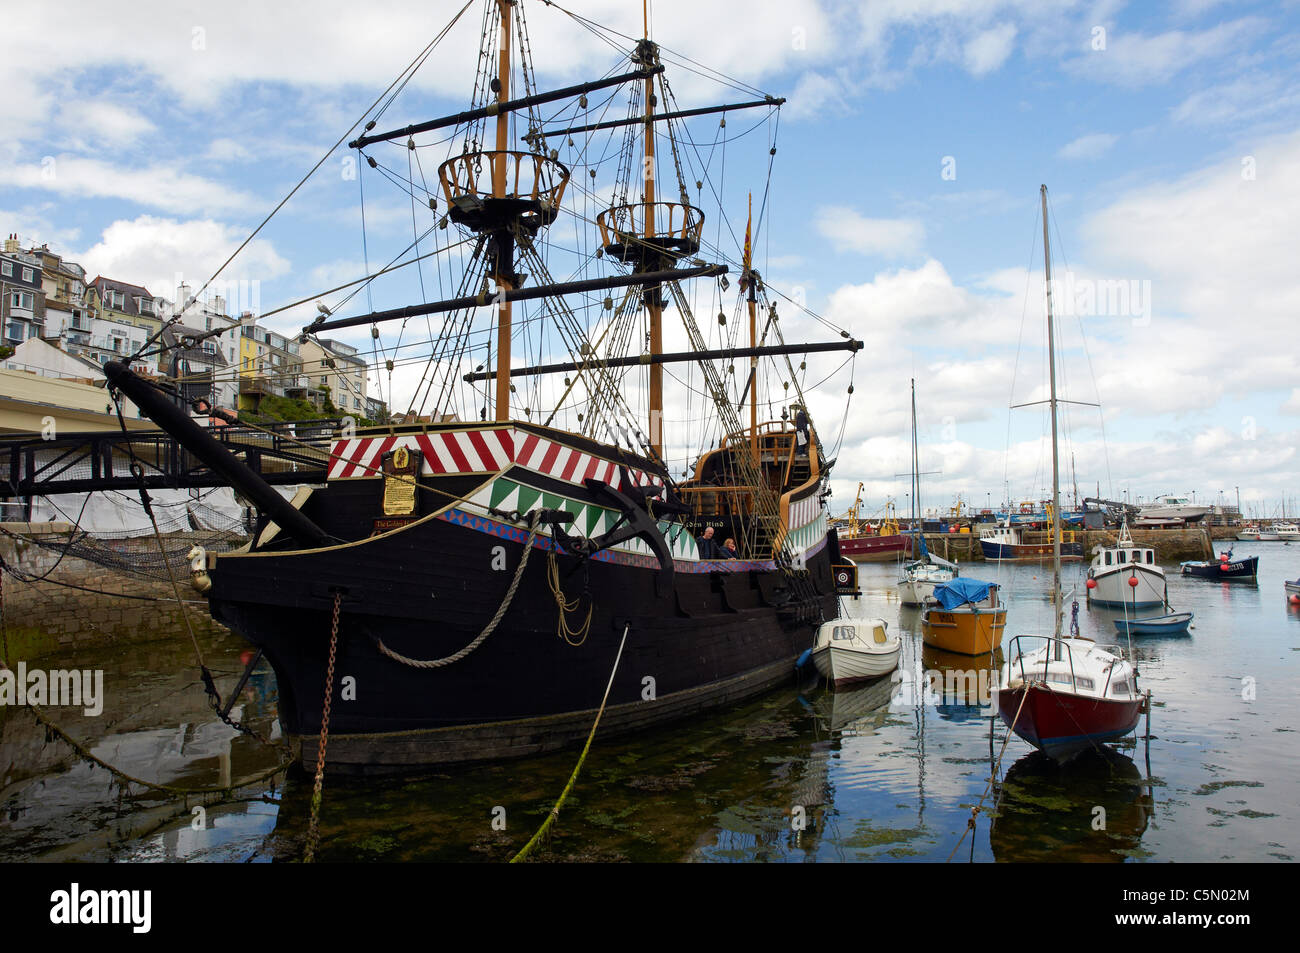 Replica of Francis Drake's ship the Golden Hind in Brixham harbour, Devon, England Stock Photo